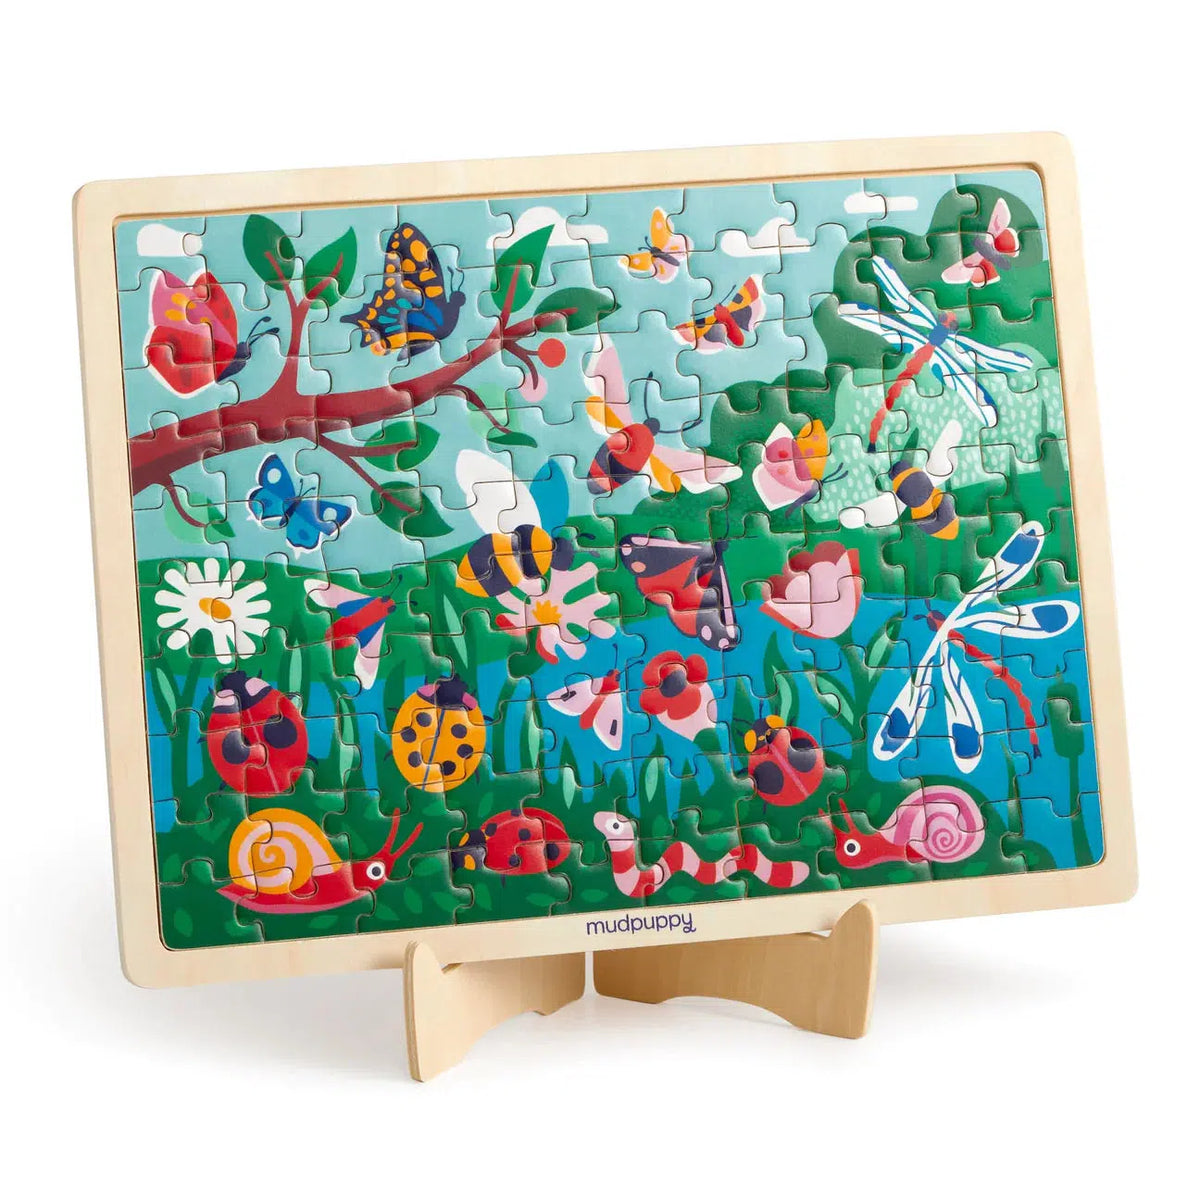 Front view of the completed garden life puzzle being displayed in the stand.